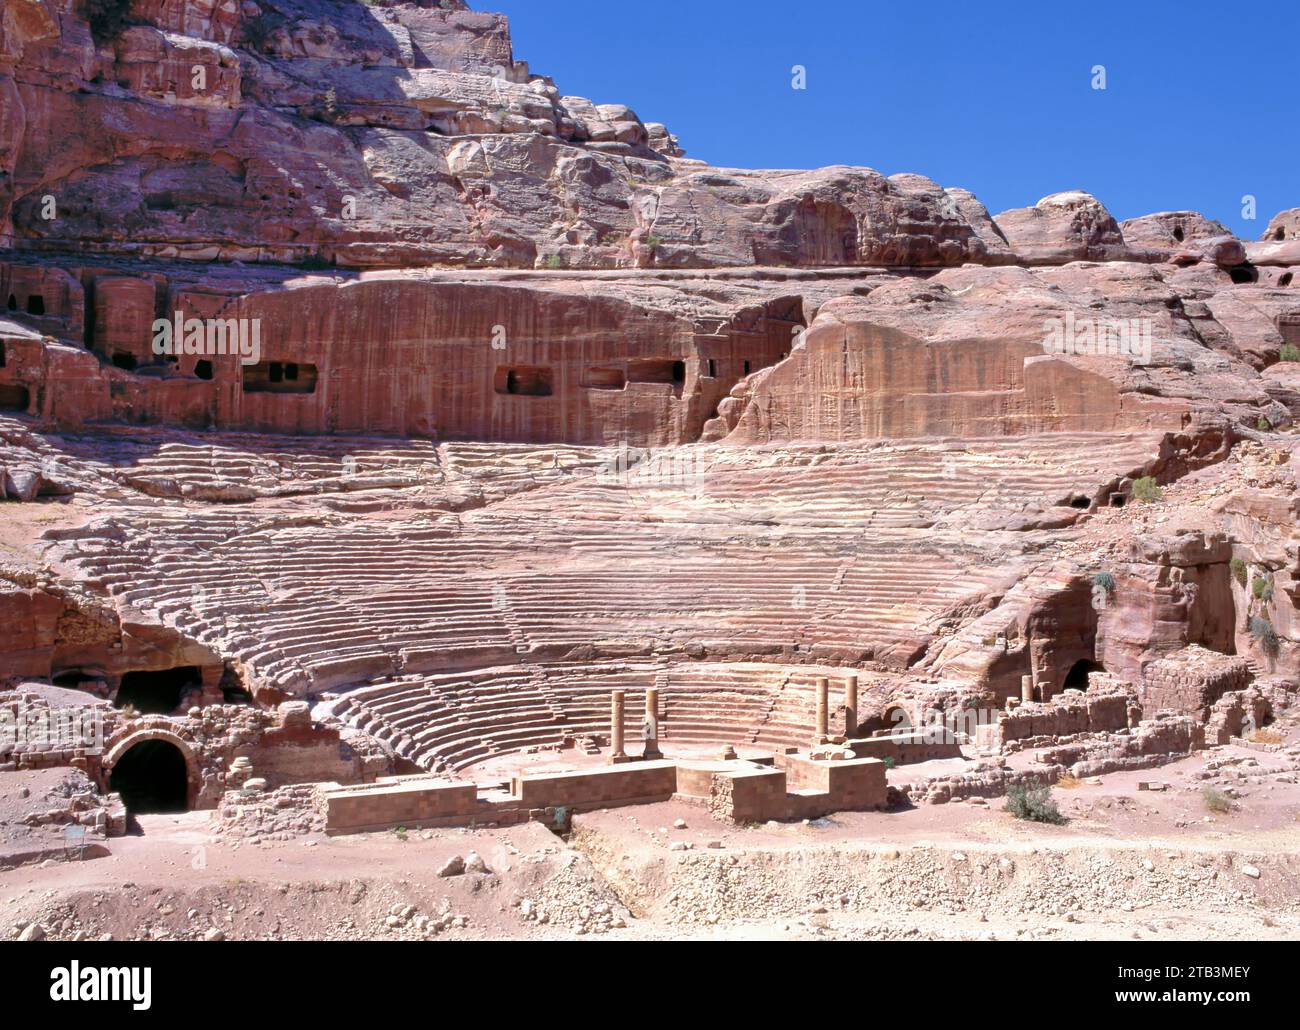 The Nabatean amphitheatre in the ancient city of Petra, Jordan. Theatre with row of seats and stairways carved into the side of the mountain. Stock Photo